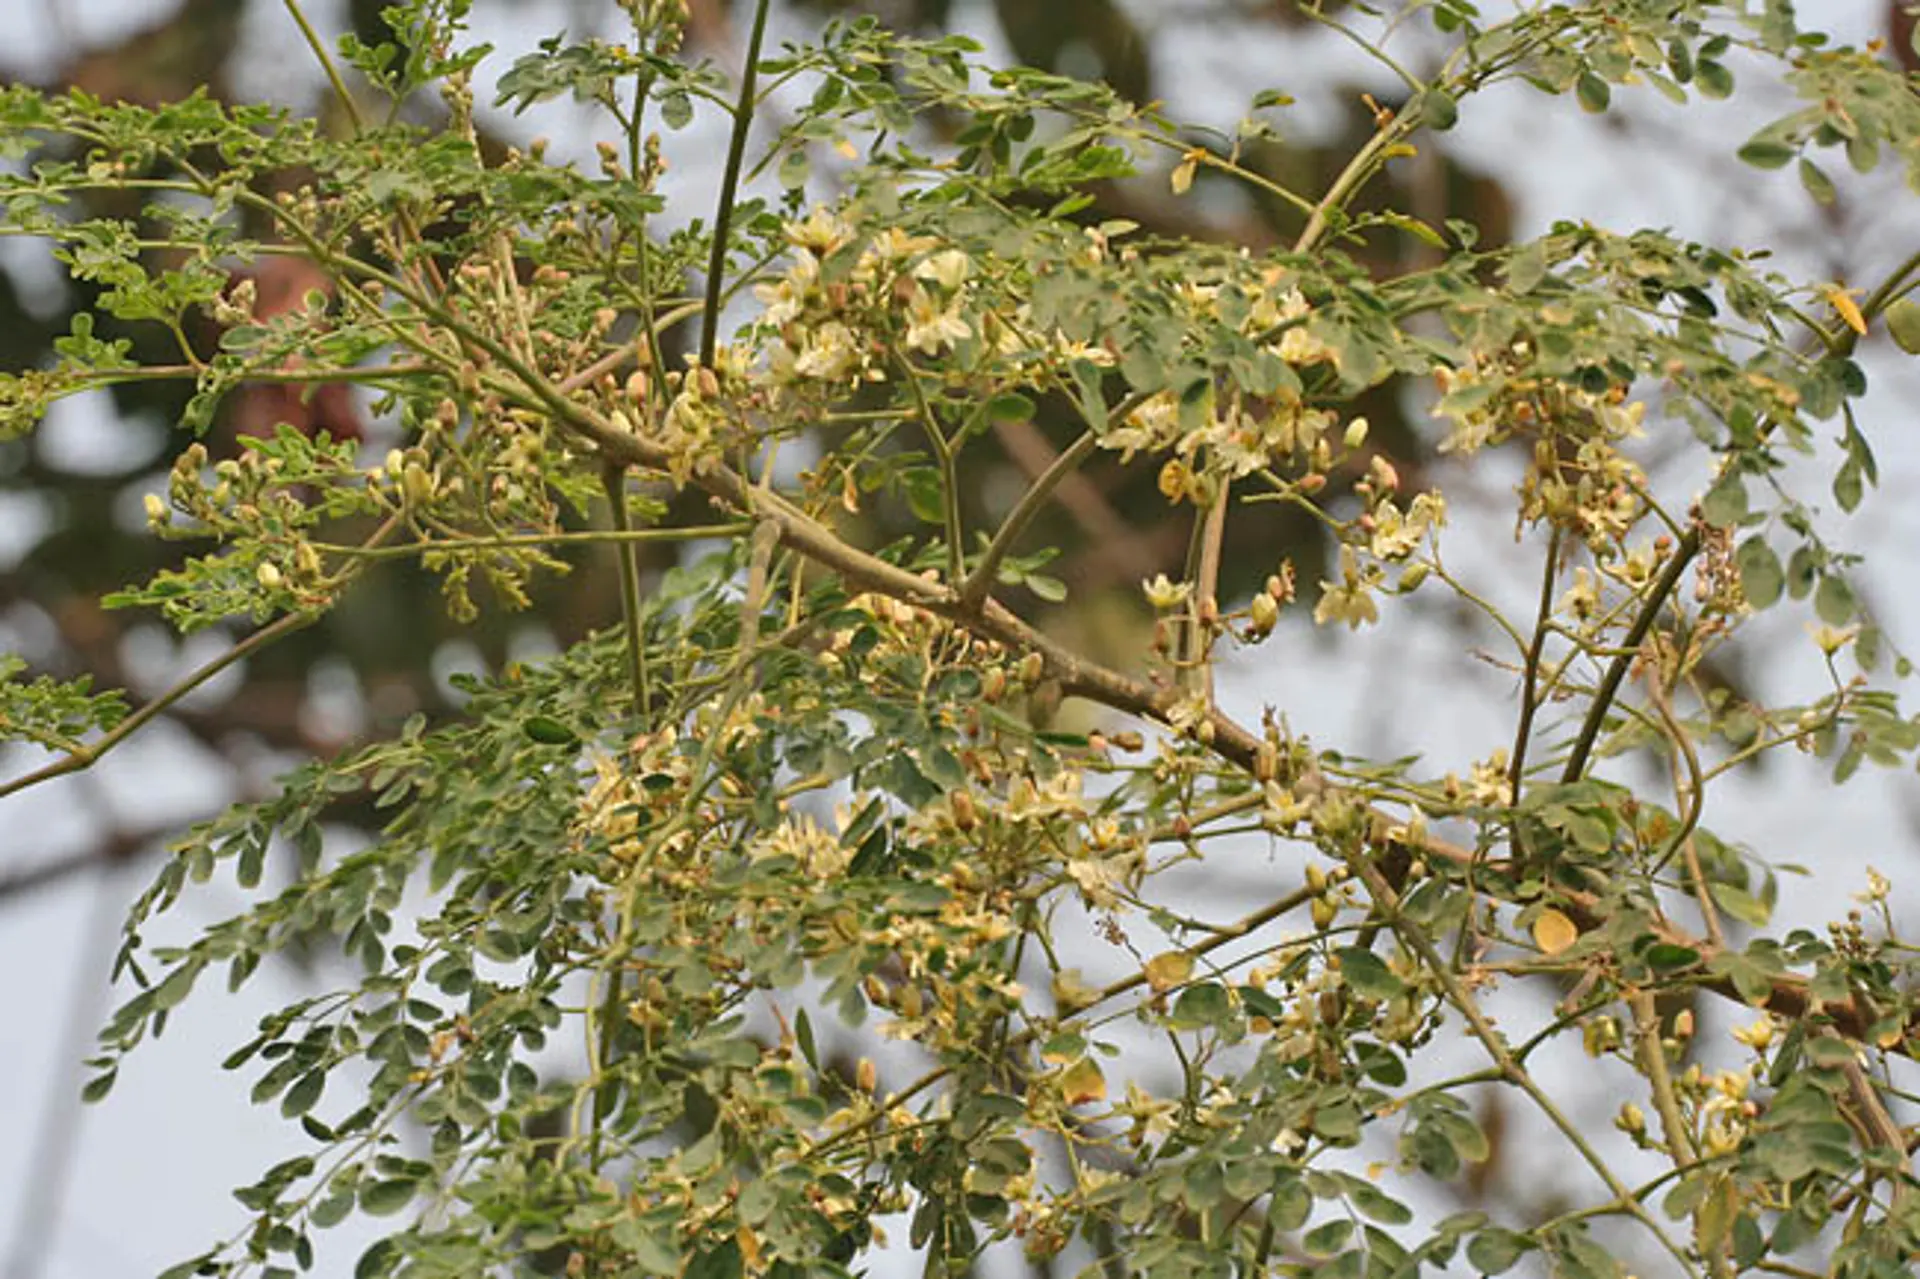 The Moringa tree, the seeds of which could purify drinking water for countless people around the world